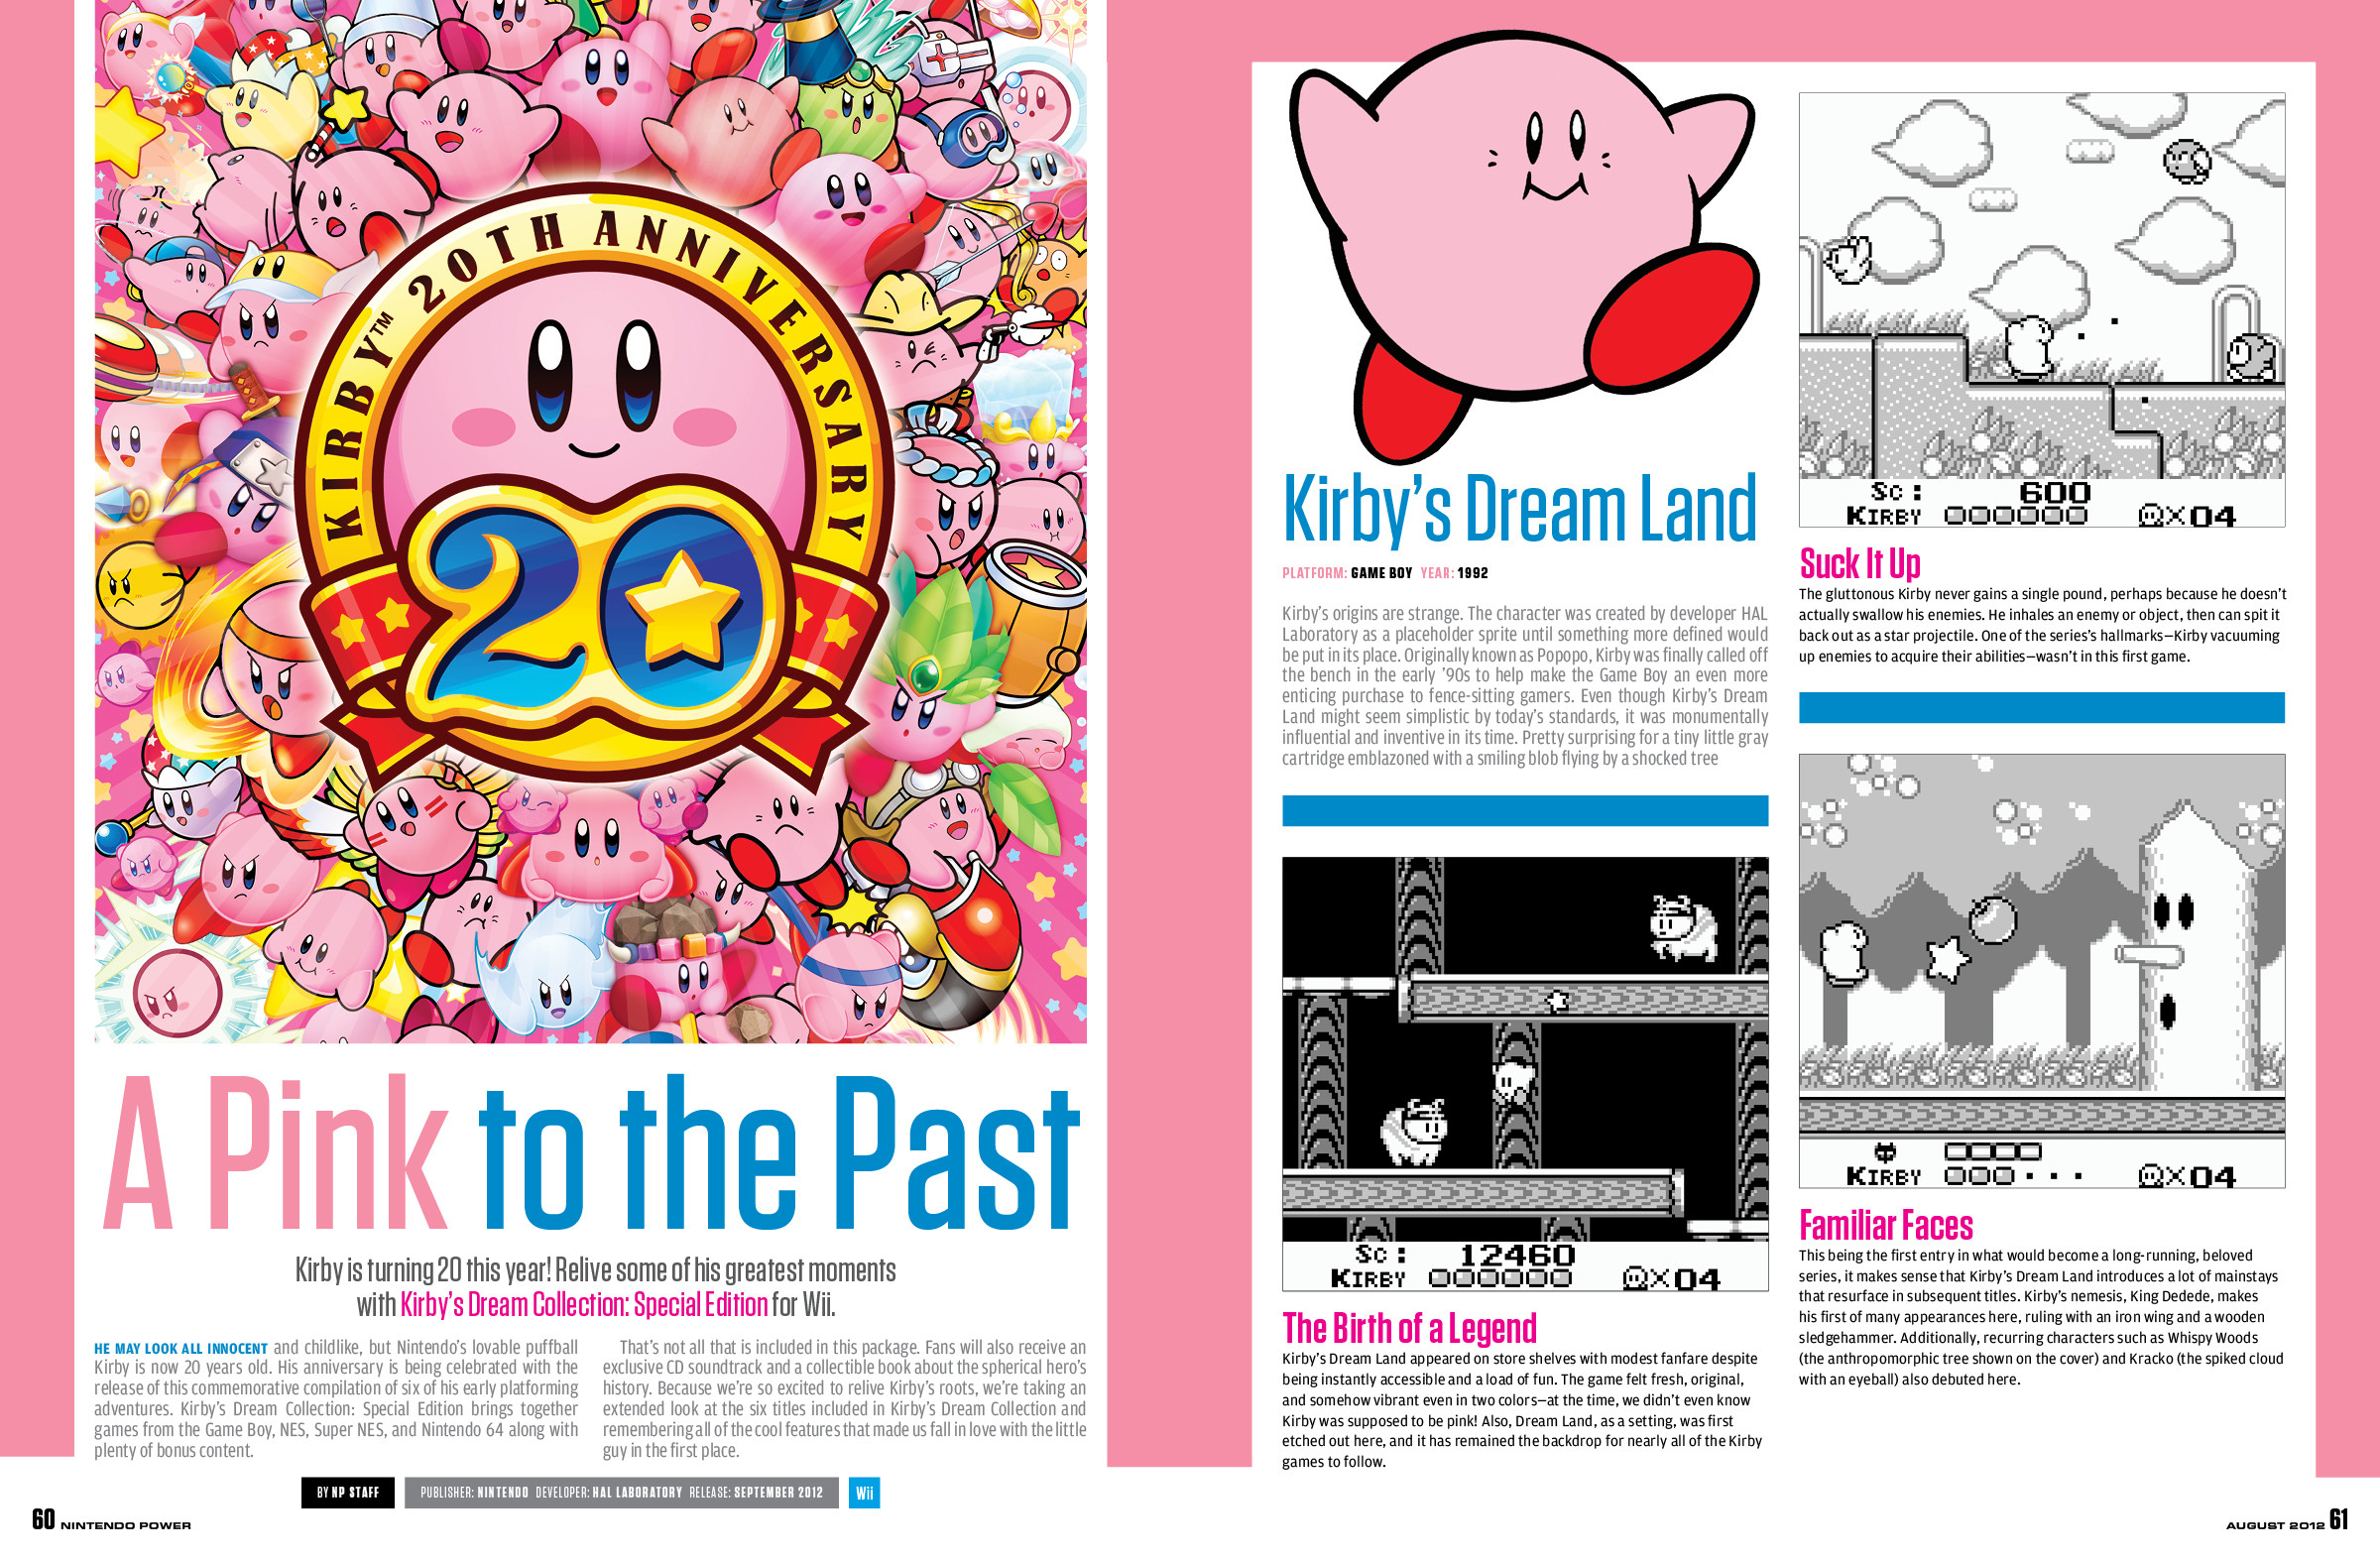 2400x1575 Titles featured include Scribblenauts Unlimited, Kirby's Dream Collection:  Special Edition, Code of Princess, and Kingdom Hearts 3D.